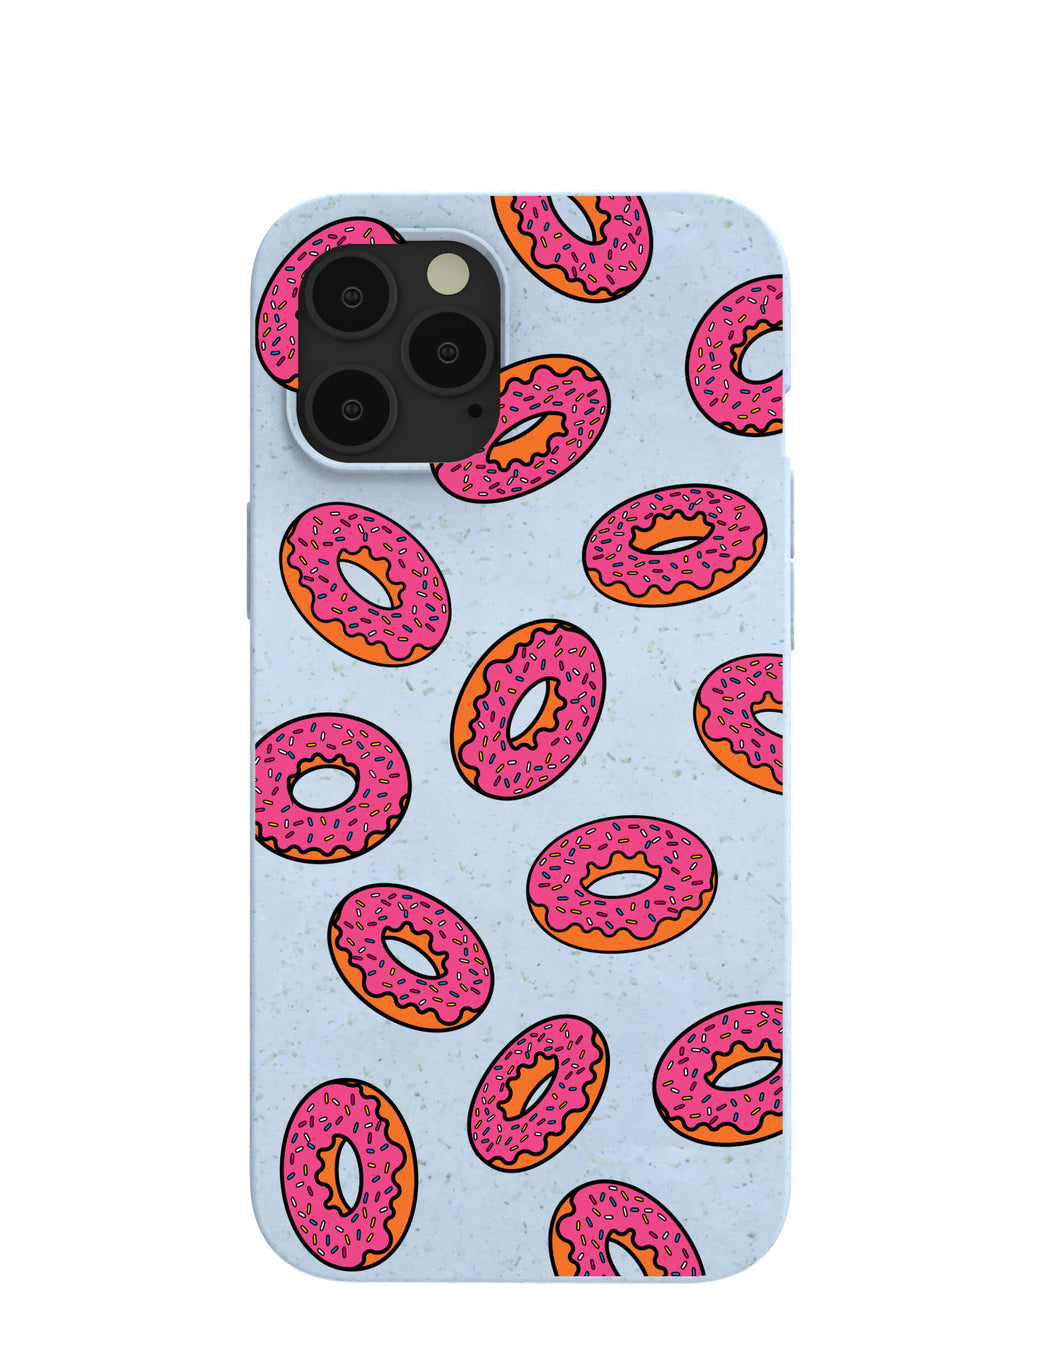 Powder Blue Donuts iPhone 12 Pro Max Case